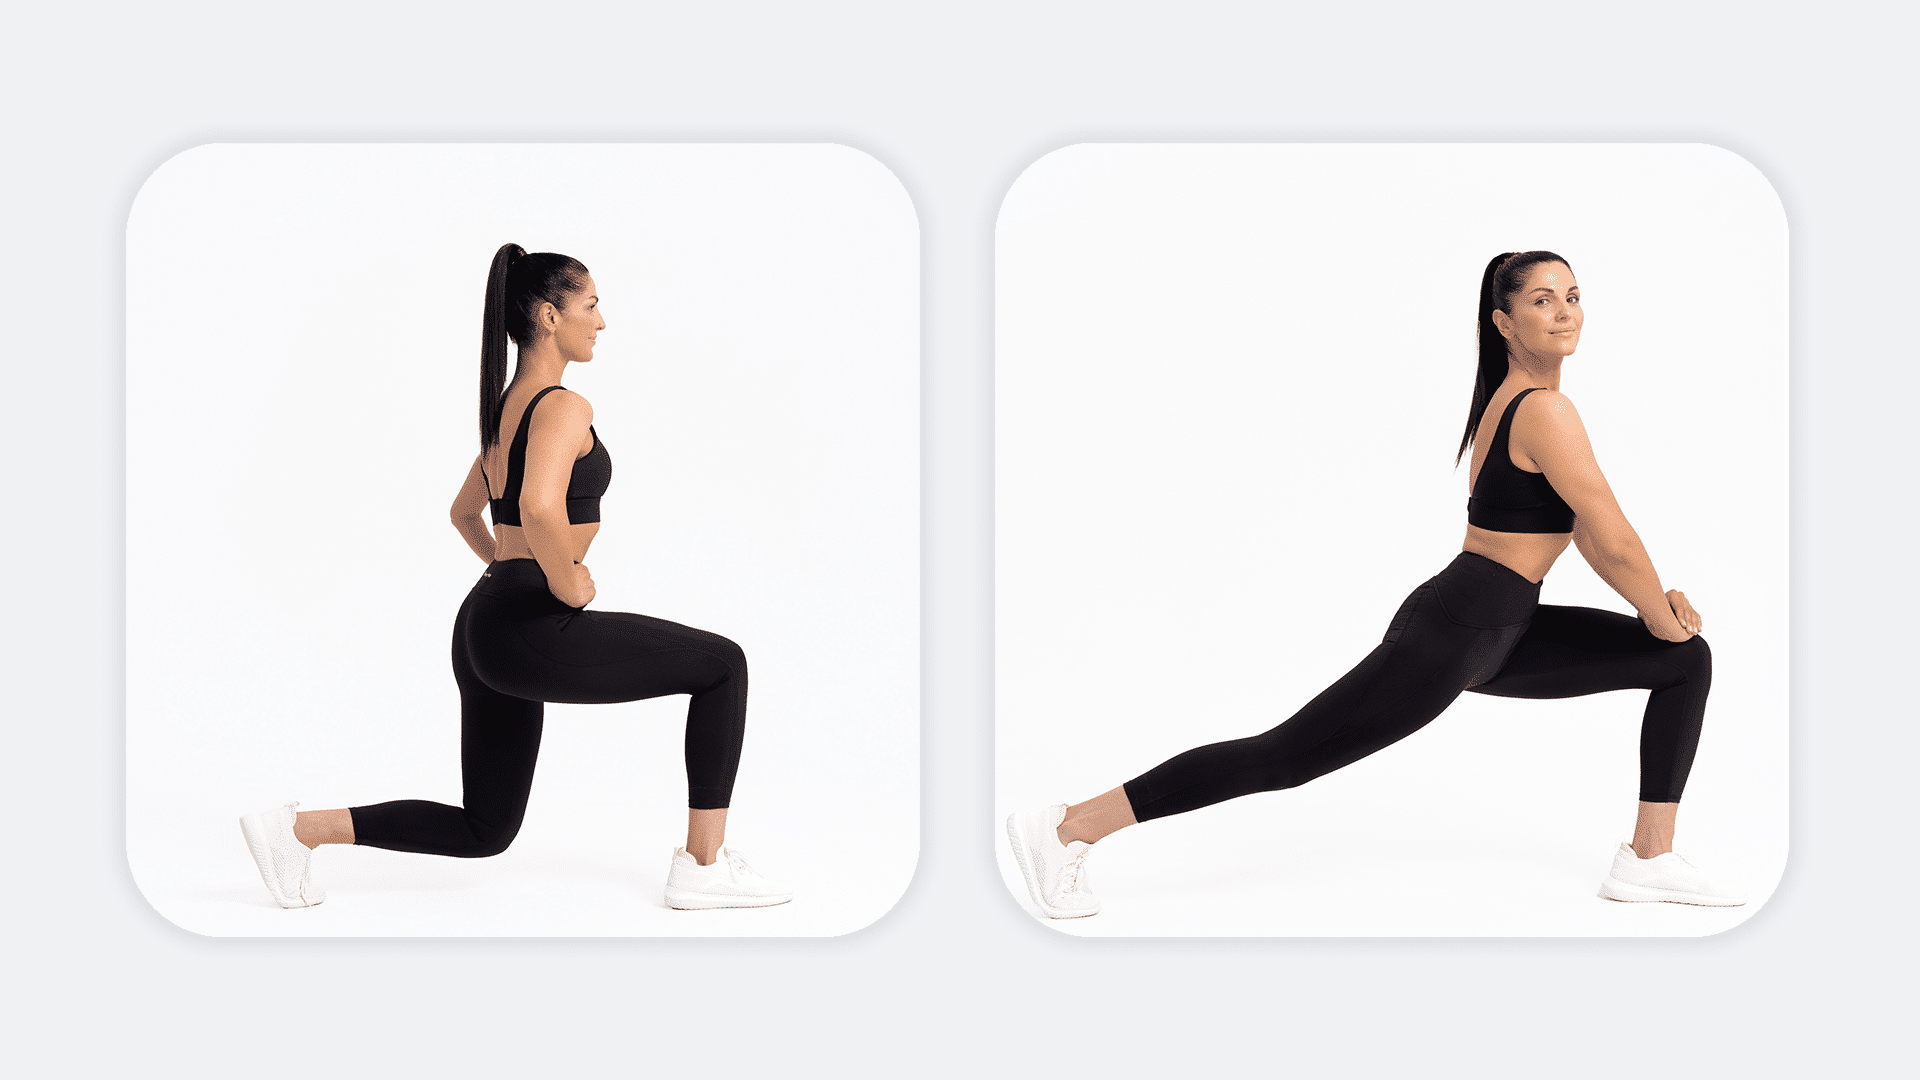 Somatic Yoga: Low-Impact Exercises to Reduce Belly Fat and Release